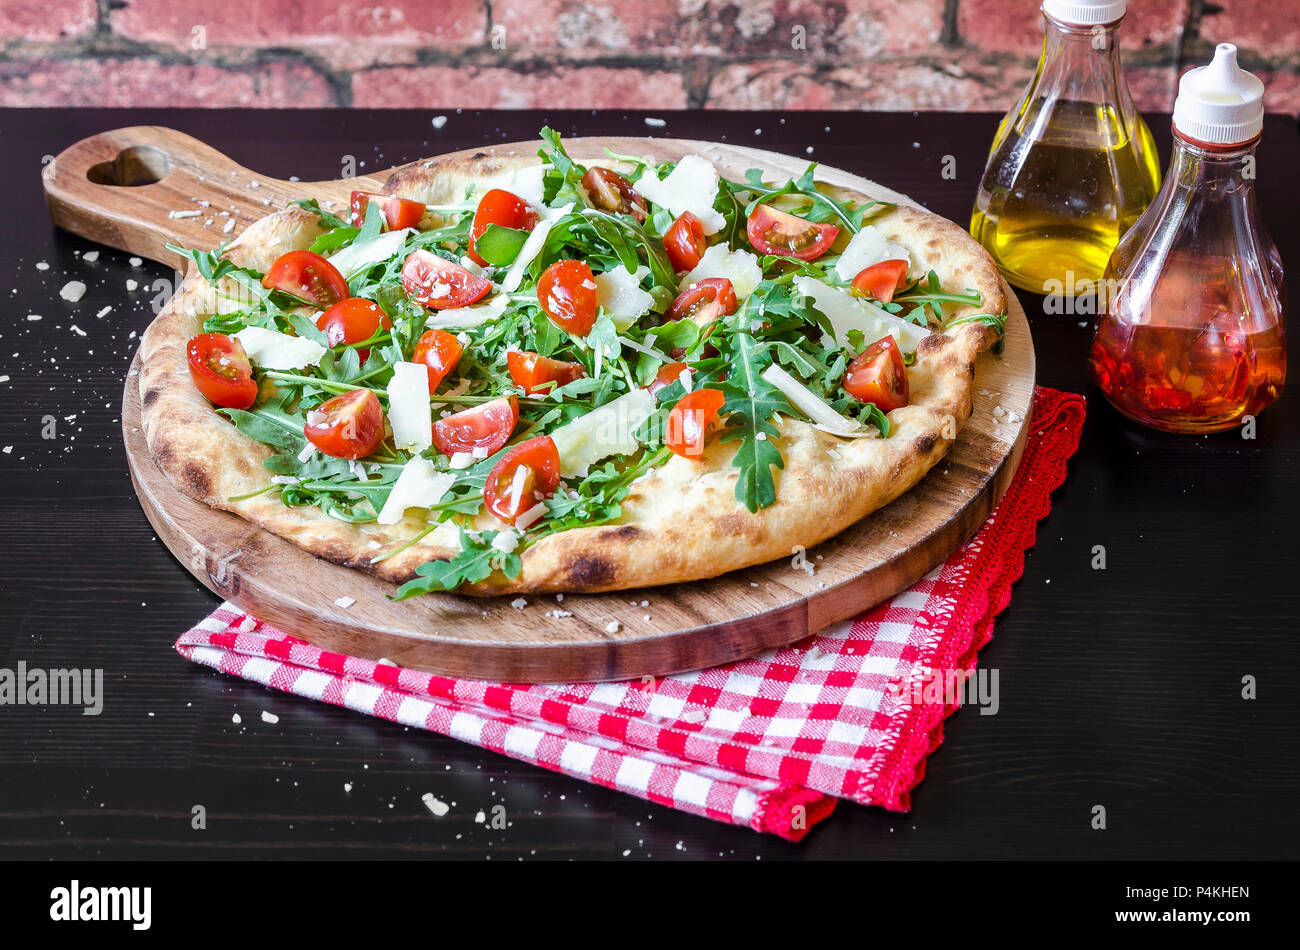 Pizza made with a sourdough base, fresh rocket leaves, cherry tomatoes and parmigiano cheese on a wooden board Stock Photo